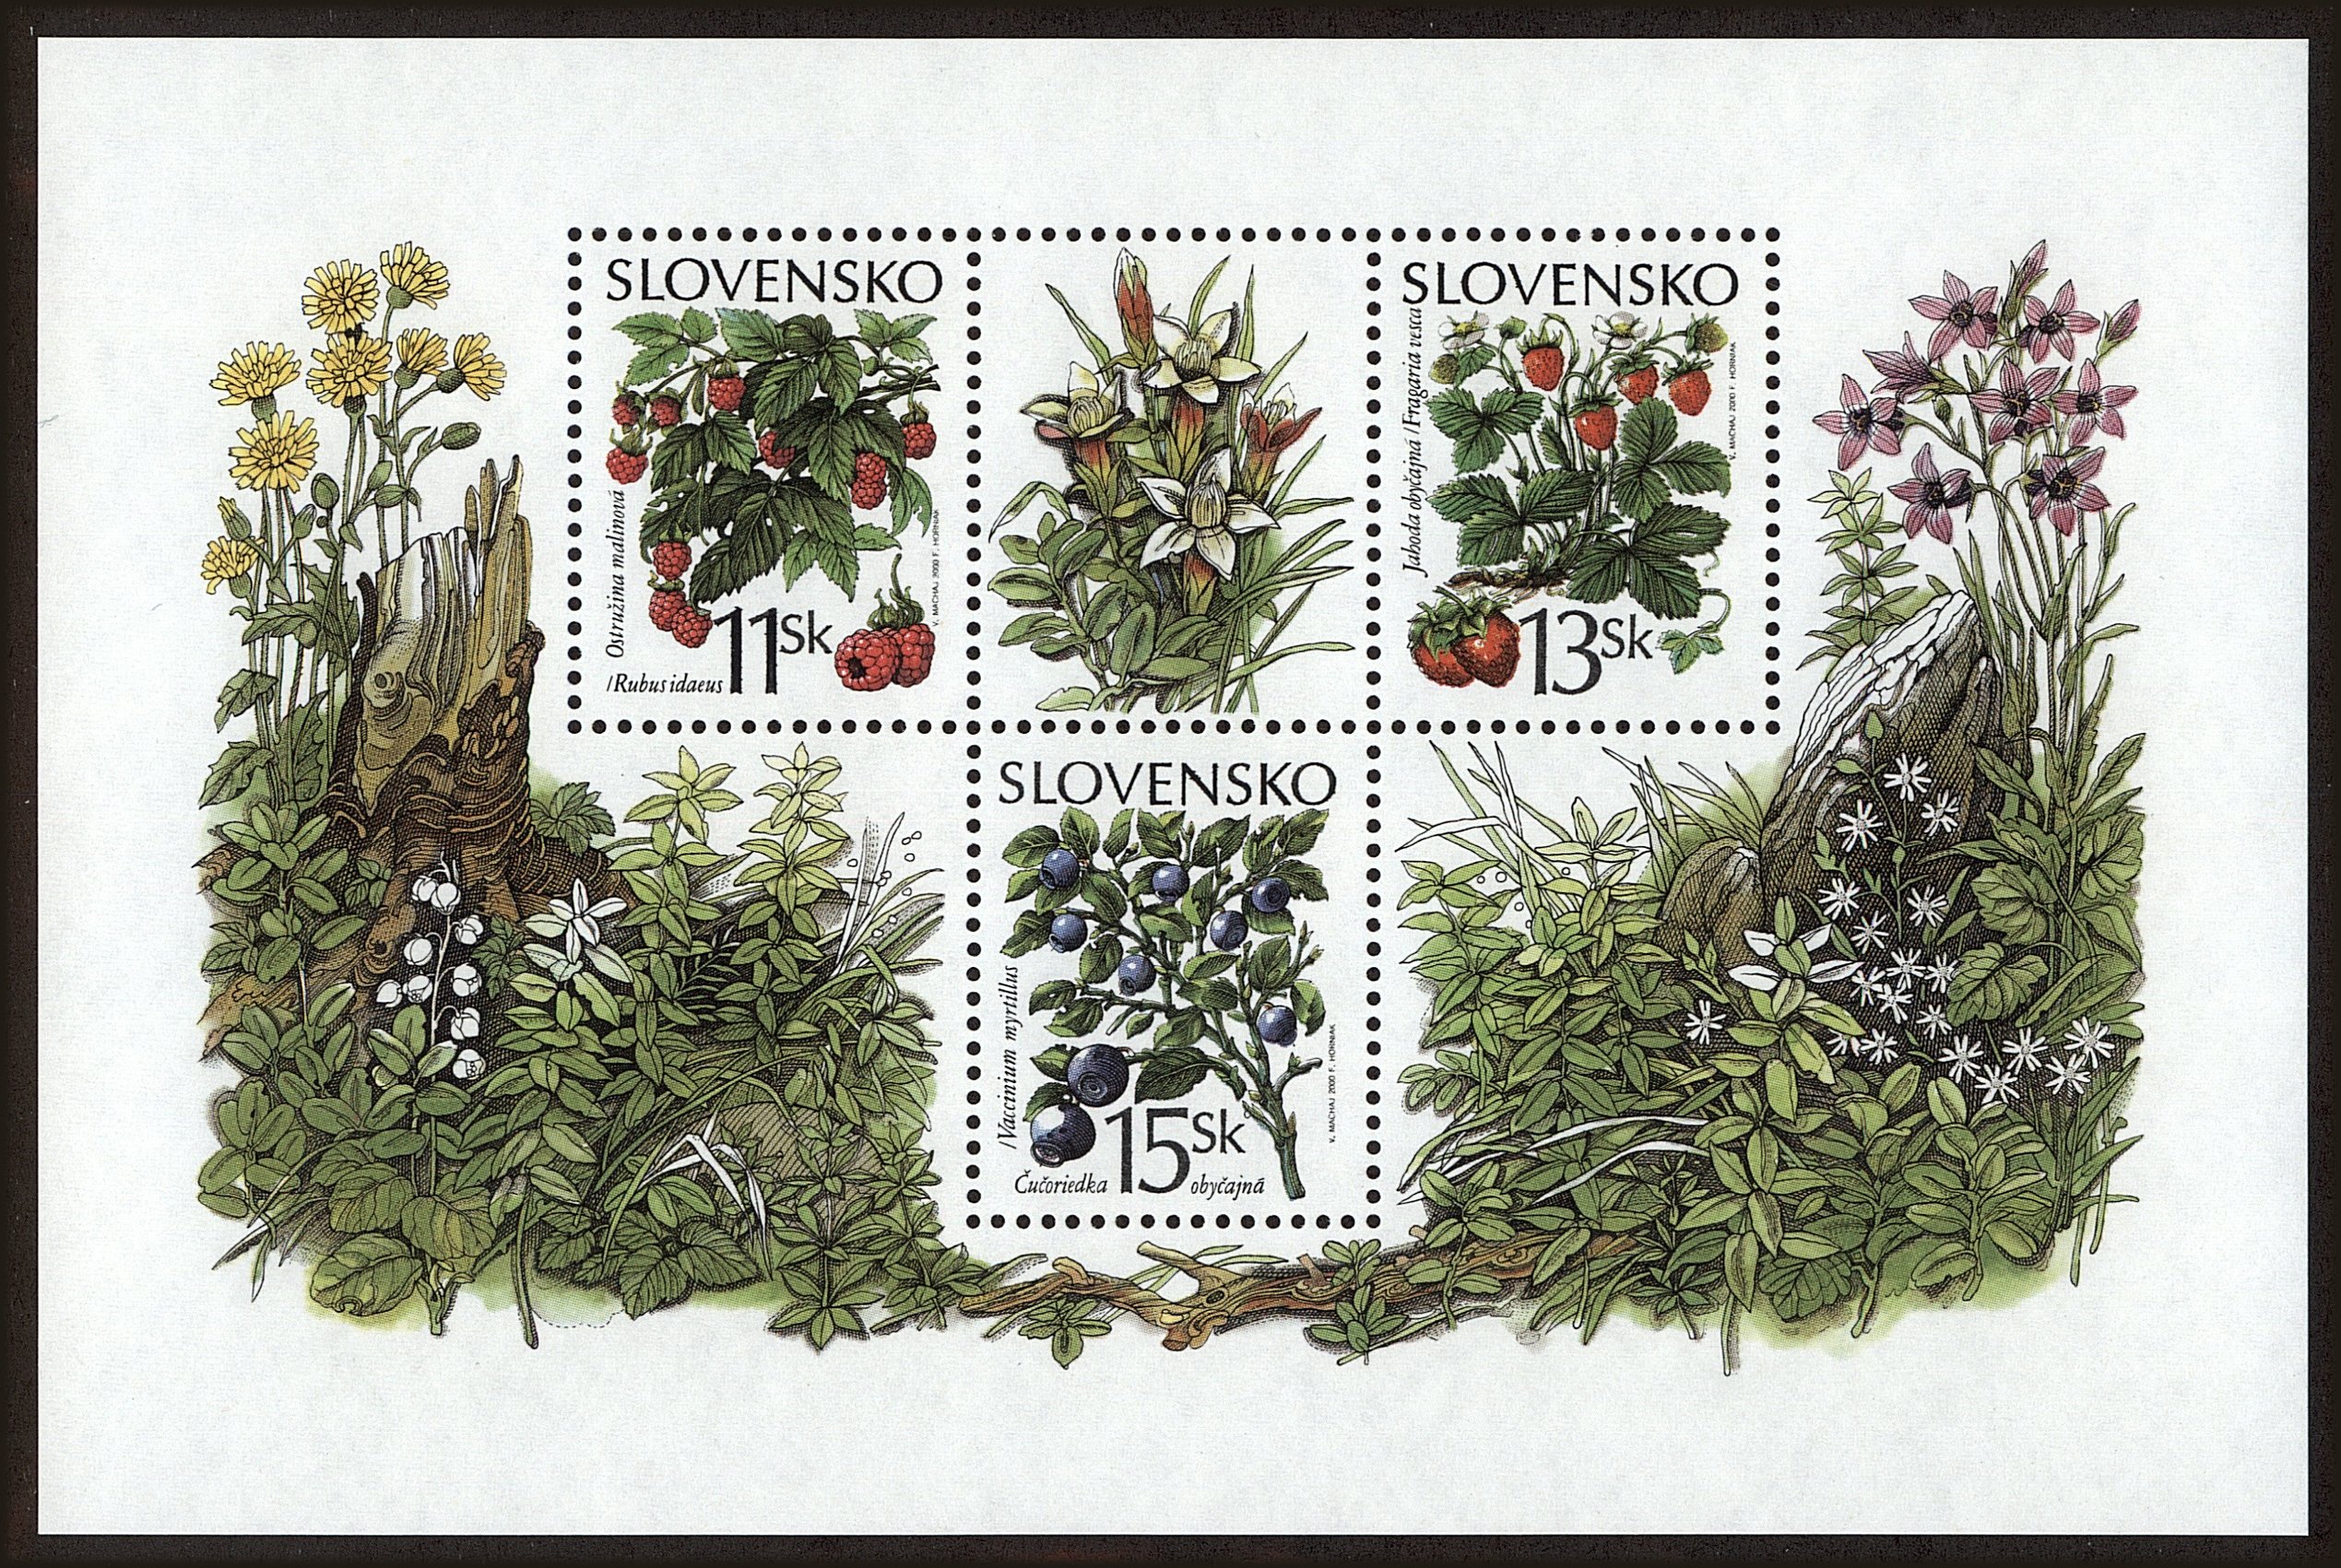 Front view of Slovakia 363 collectors stamp